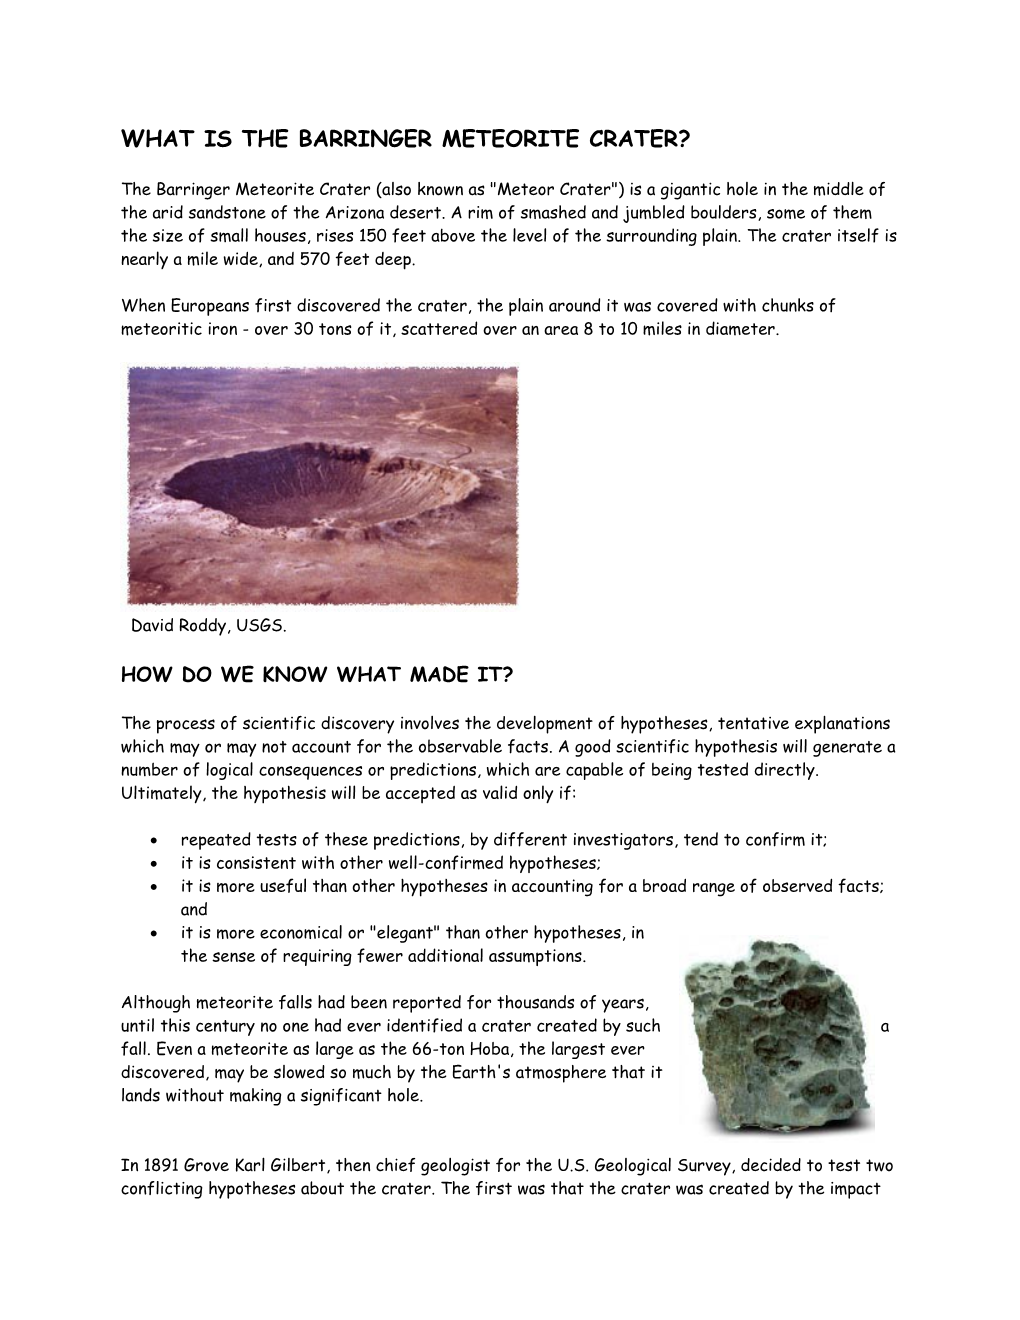 What Is the Barringer Meteorite Crater?